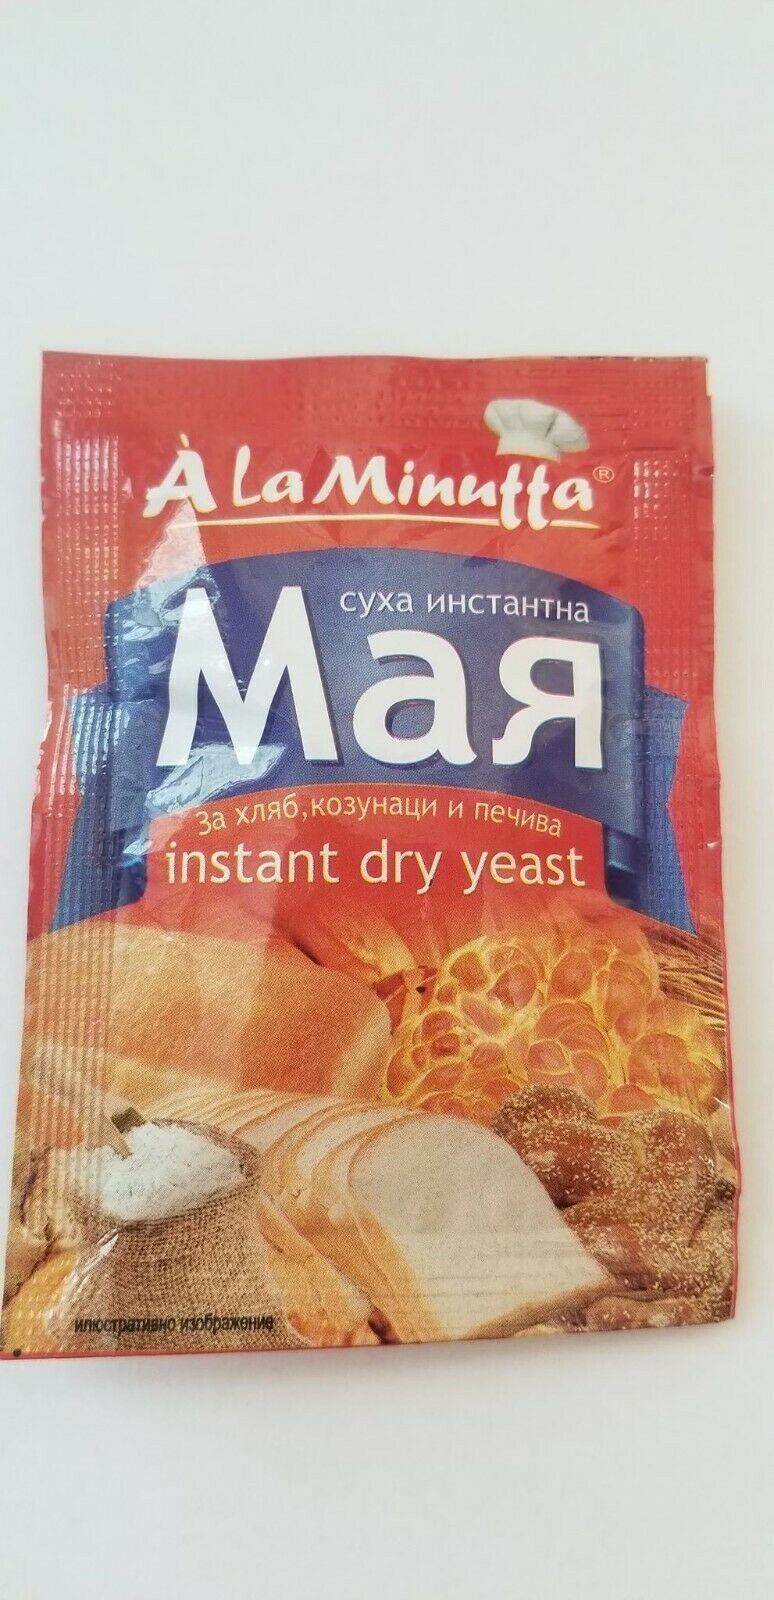 Primary image for 10 x 7g. Dried Yeast by A La Minutta Sachets the Best for Bread & Baking